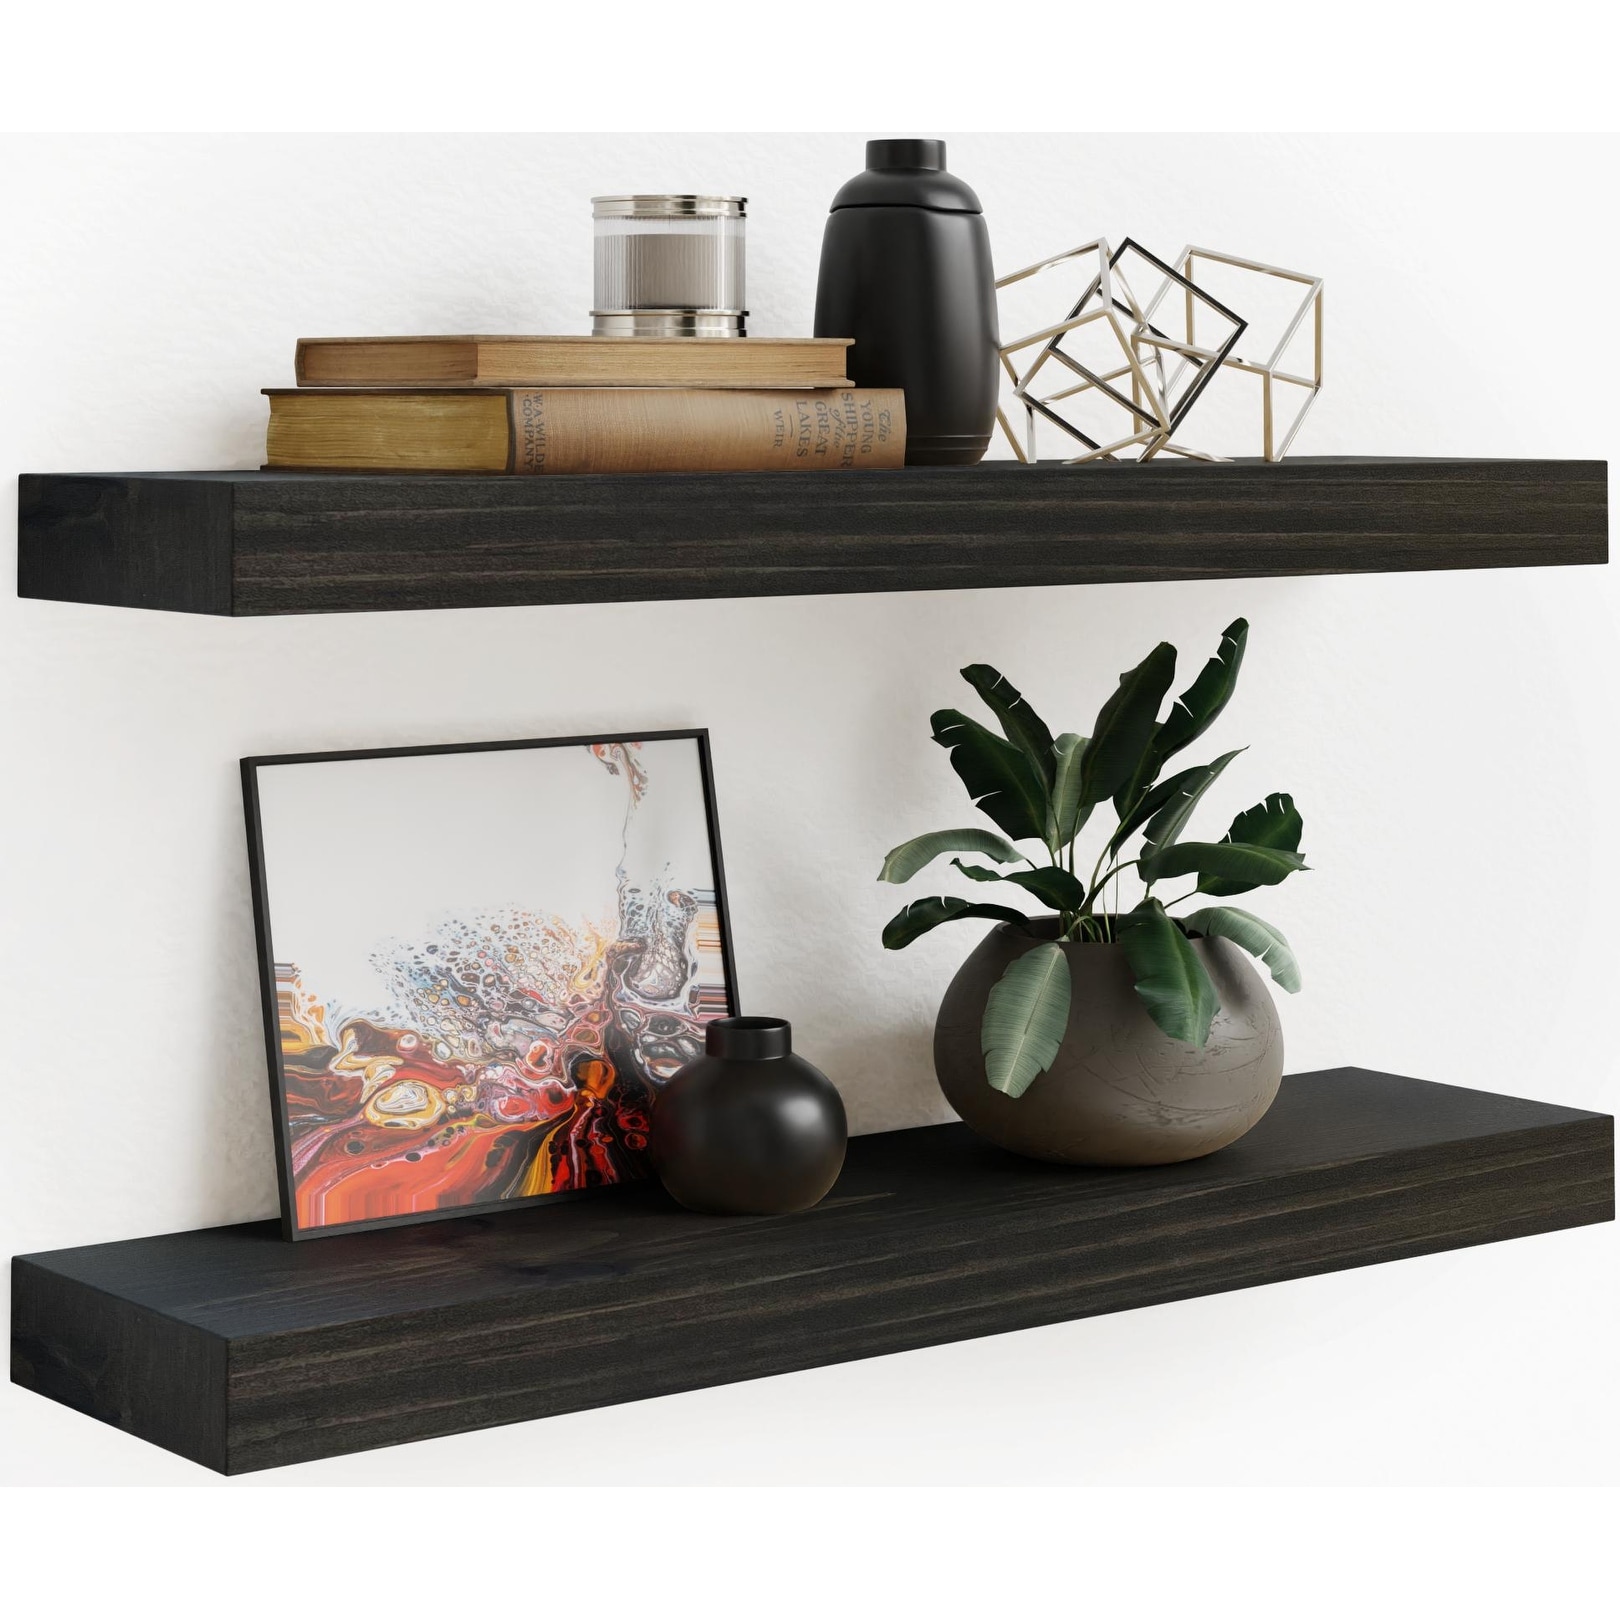 https://ak1.ostkcdn.com/images/products/is/images/direct/adadb721c69a7e347c04661616f5fc7e71530751/Rustic-Wooden-Floating-Wall-Shelves-%28Set-of-2%29.jpg